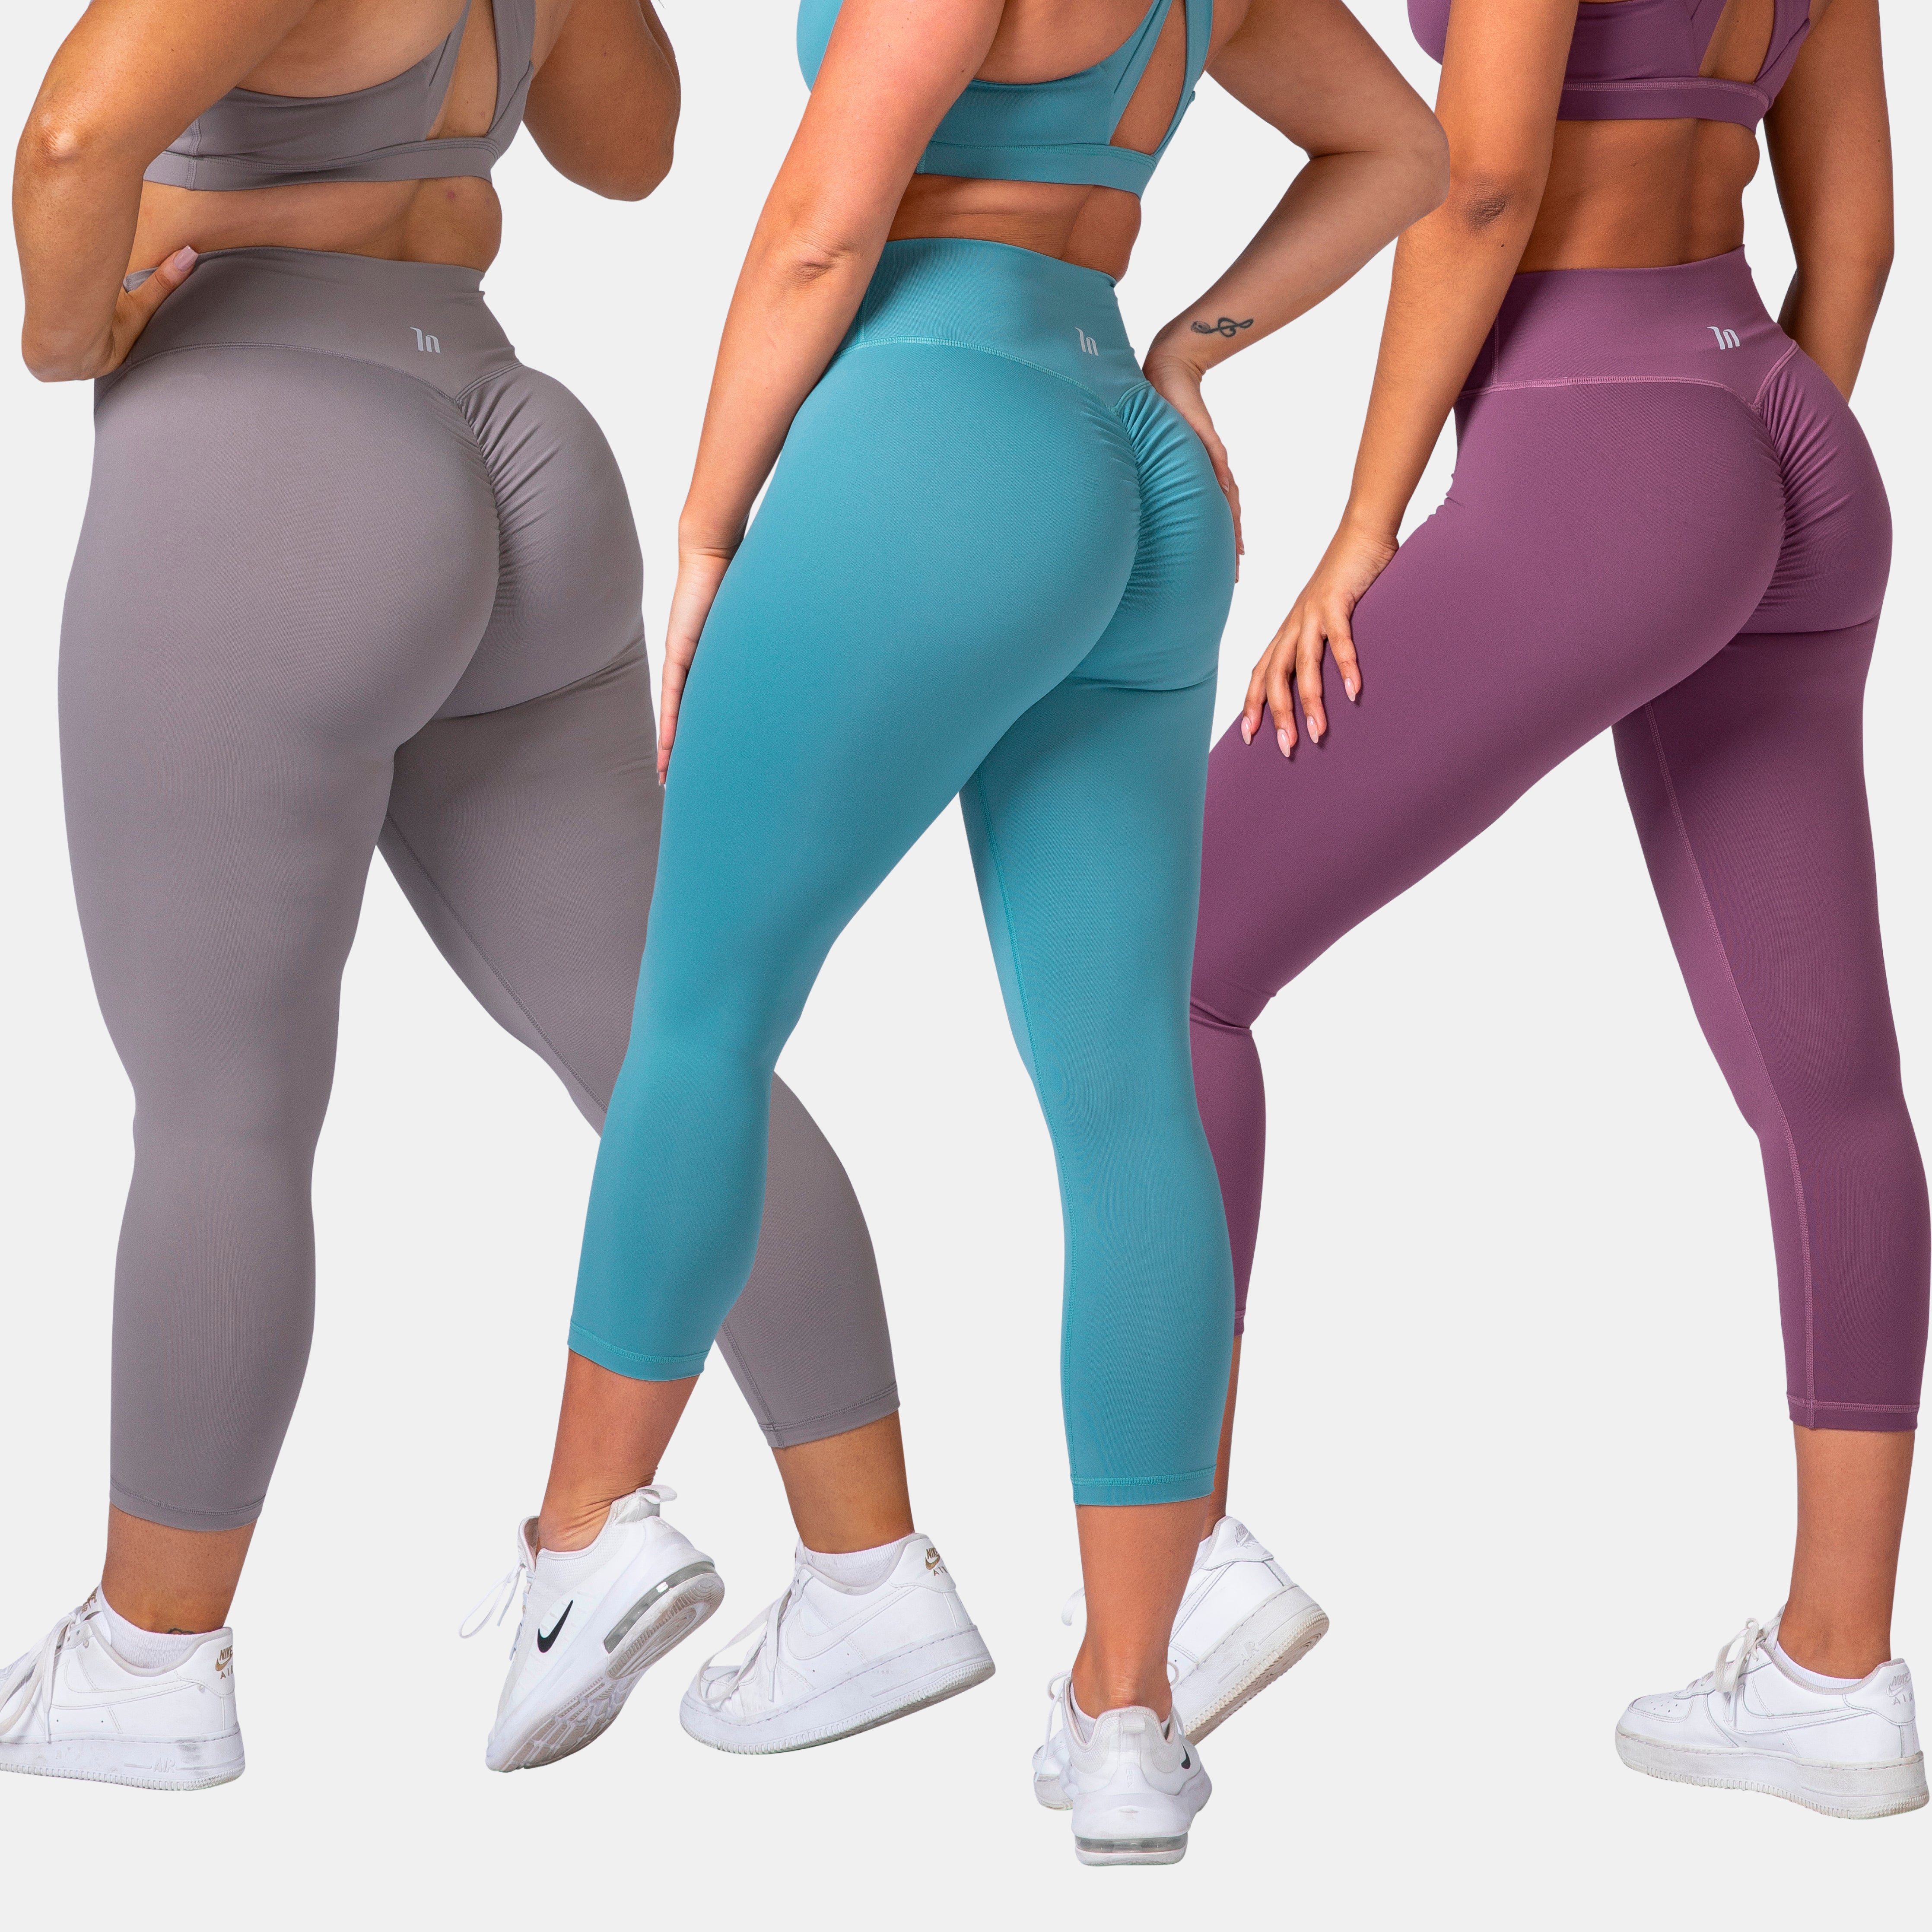 What are scrunch bum leggings and why do you need them? - Muscle Nation